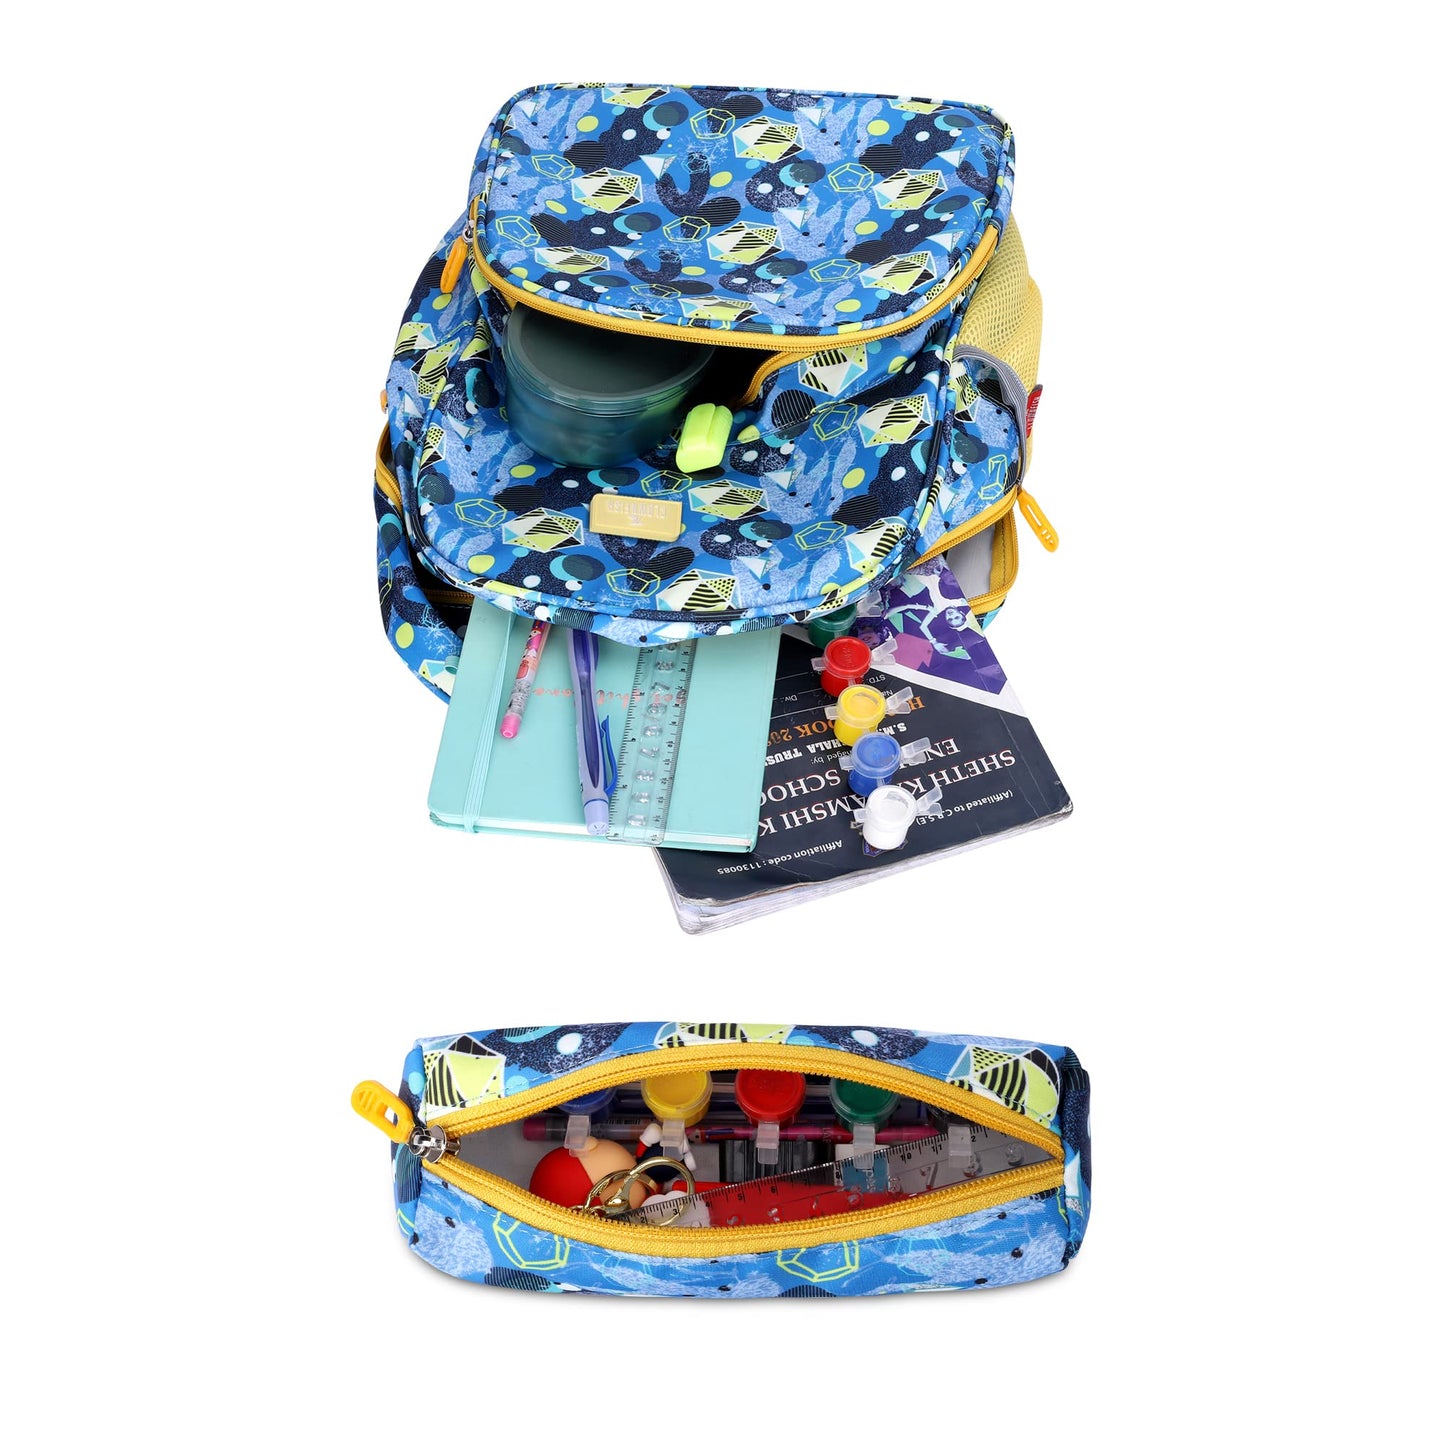 THE CLOWNFISH Cosmic Critters Series Printed Polyester 15 Litres Kids Standard Backpack School Bag With Free Pencil Staionery Pouch Daypack Picnic Bag For Tiny Tots Of Age 5-7 Yrs Light BlueMedium